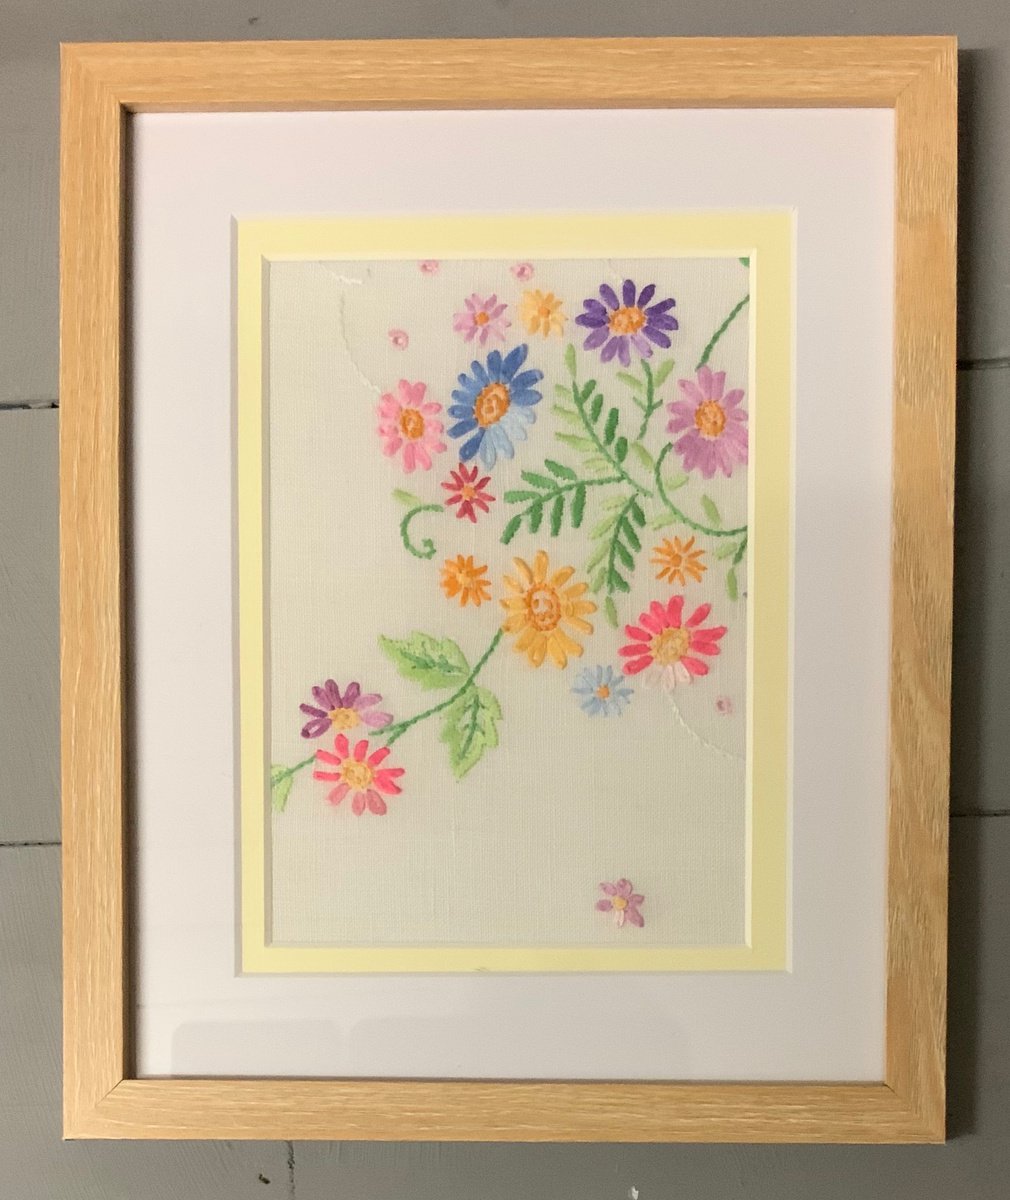 Summer Bliss - Vintage 1930s hand embroidered artwork by Sarah Gill